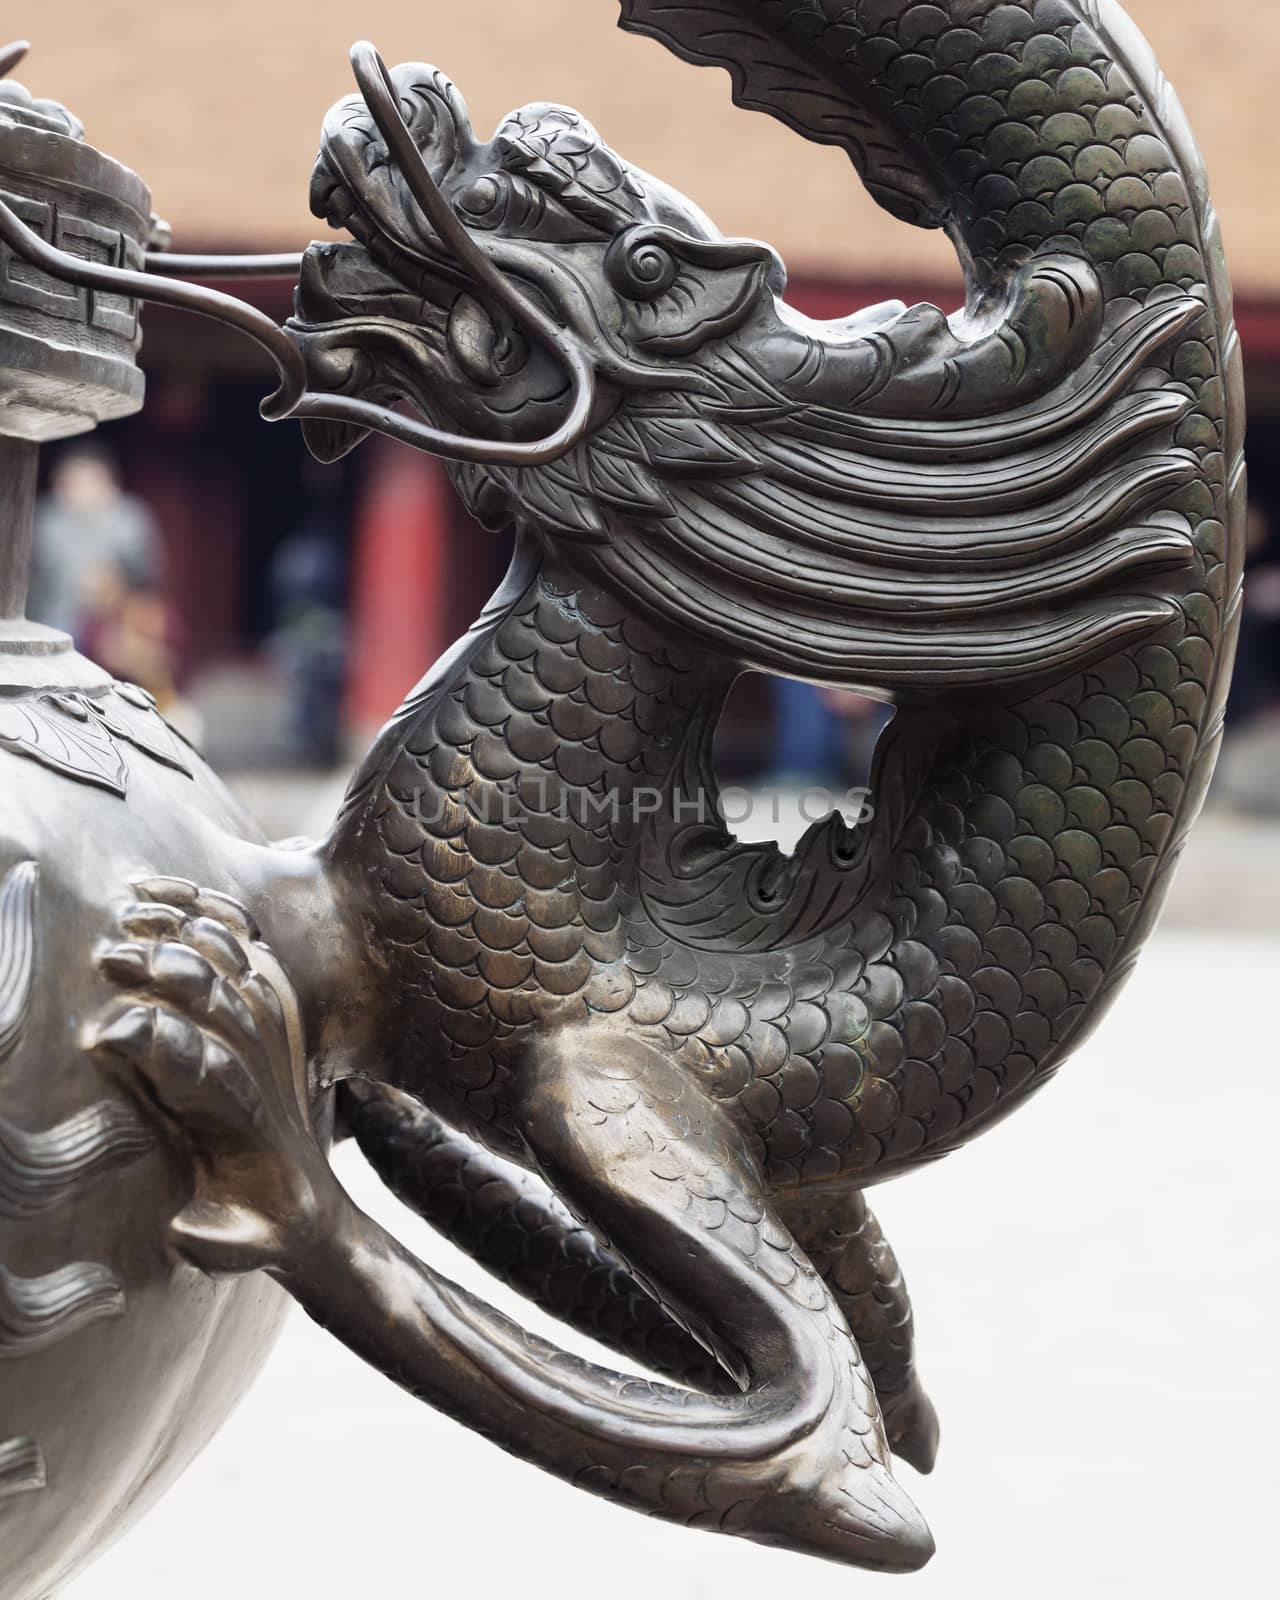 Dragon sculpture in a temple in Hanoi, Vietnam by Goodday